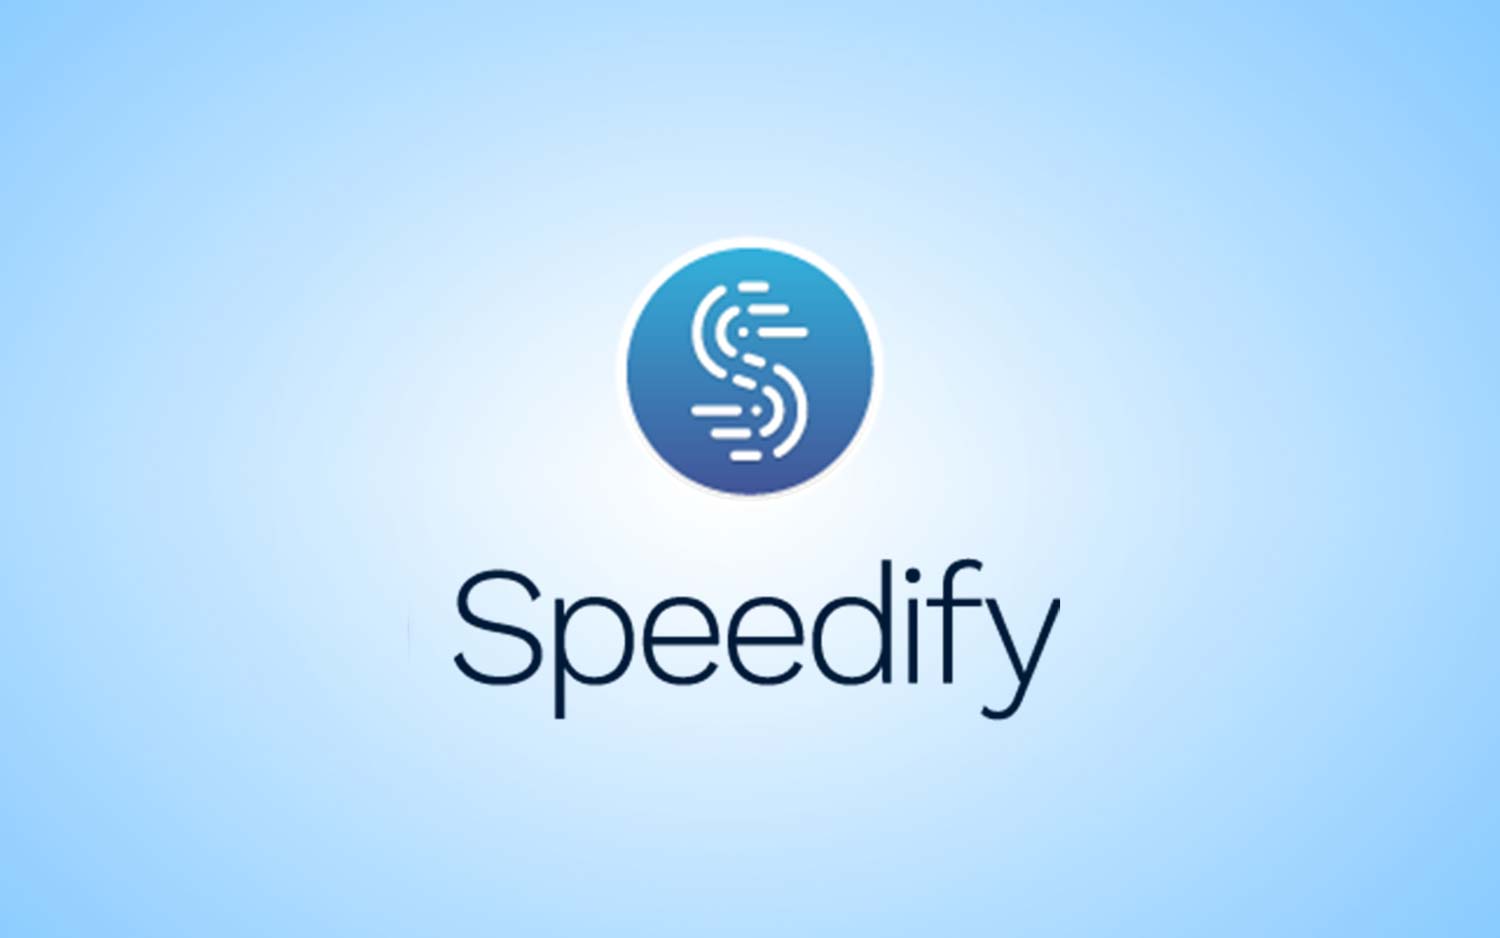 Speedify Fails to Deliver on Its Promises - Anonymania